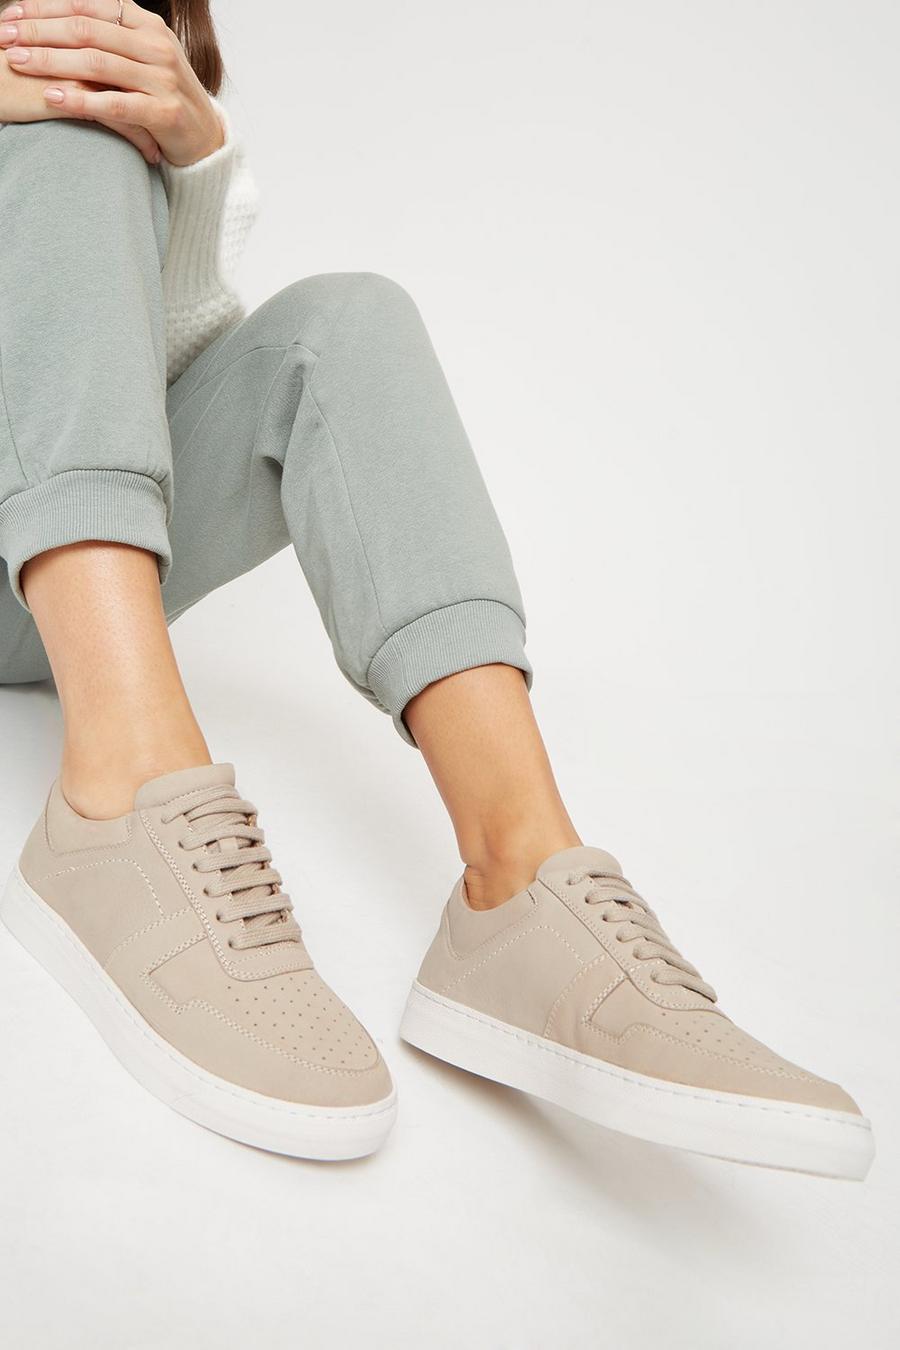 Good For The Sole: Indie Comfort Leather Lace Up Trainer